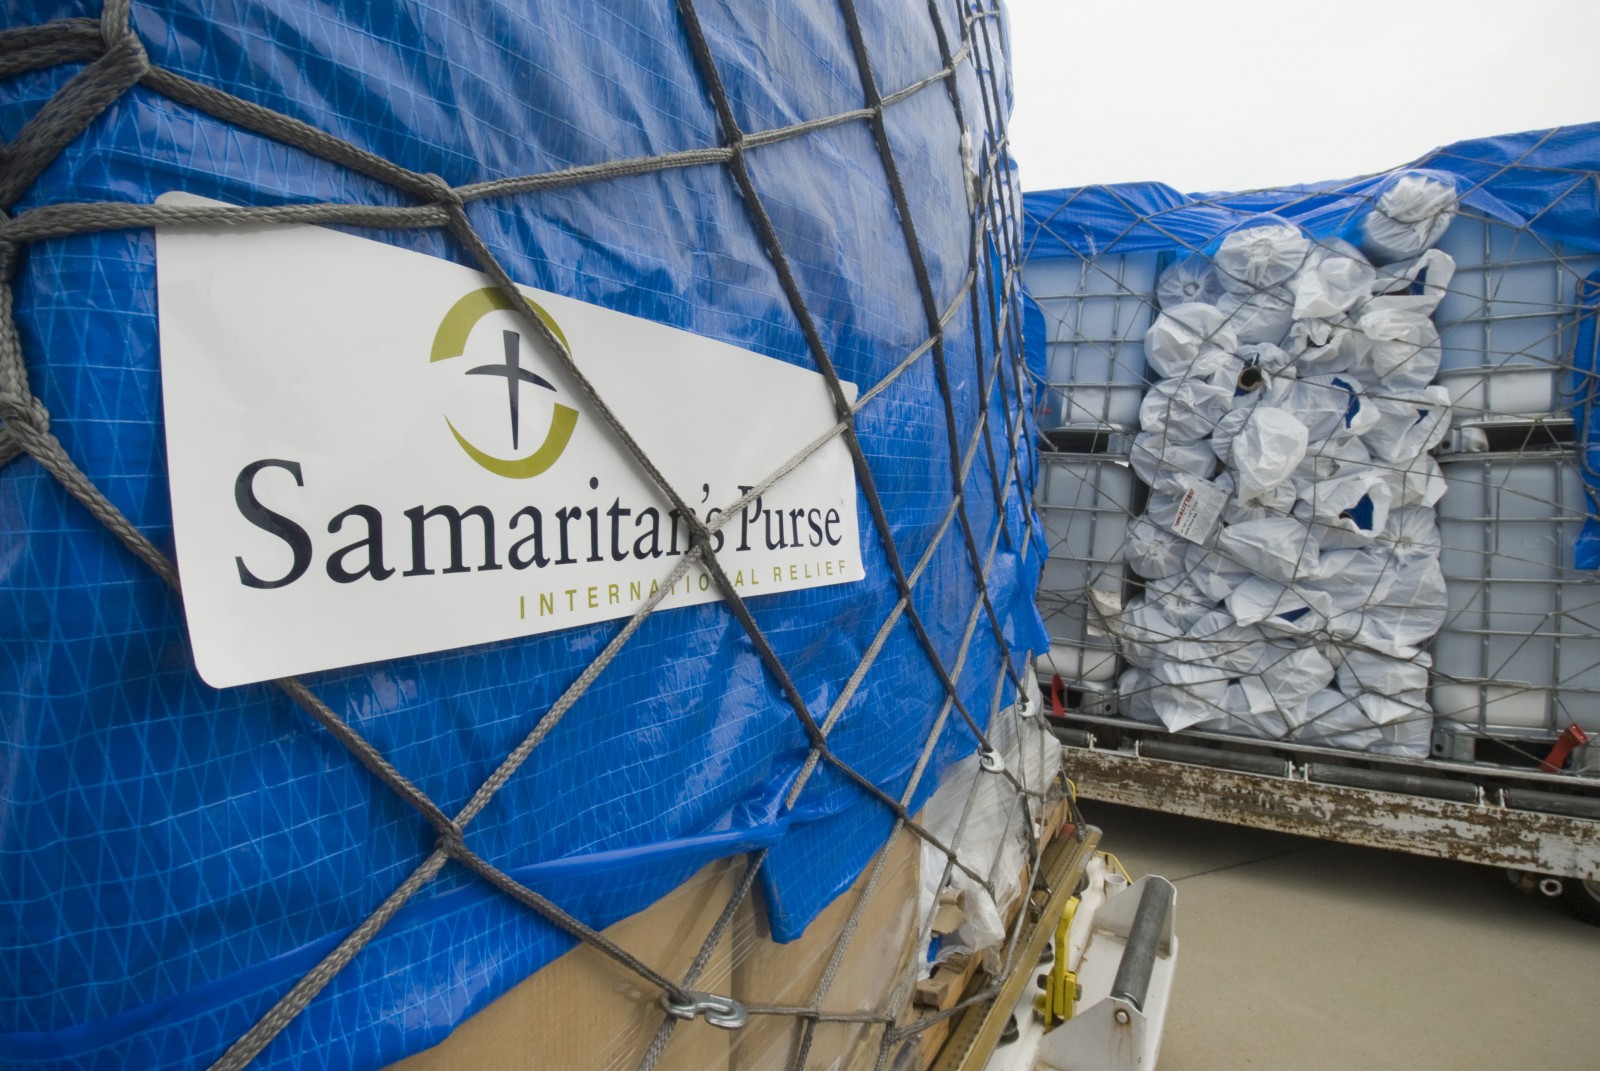 Samaritan's Purse is an international Christian relief organization working in more than 100 countries to provide aid to victims of war, disease, natural disaster, poverty, famine and persecution. (sample of what may be sent to Haiti)